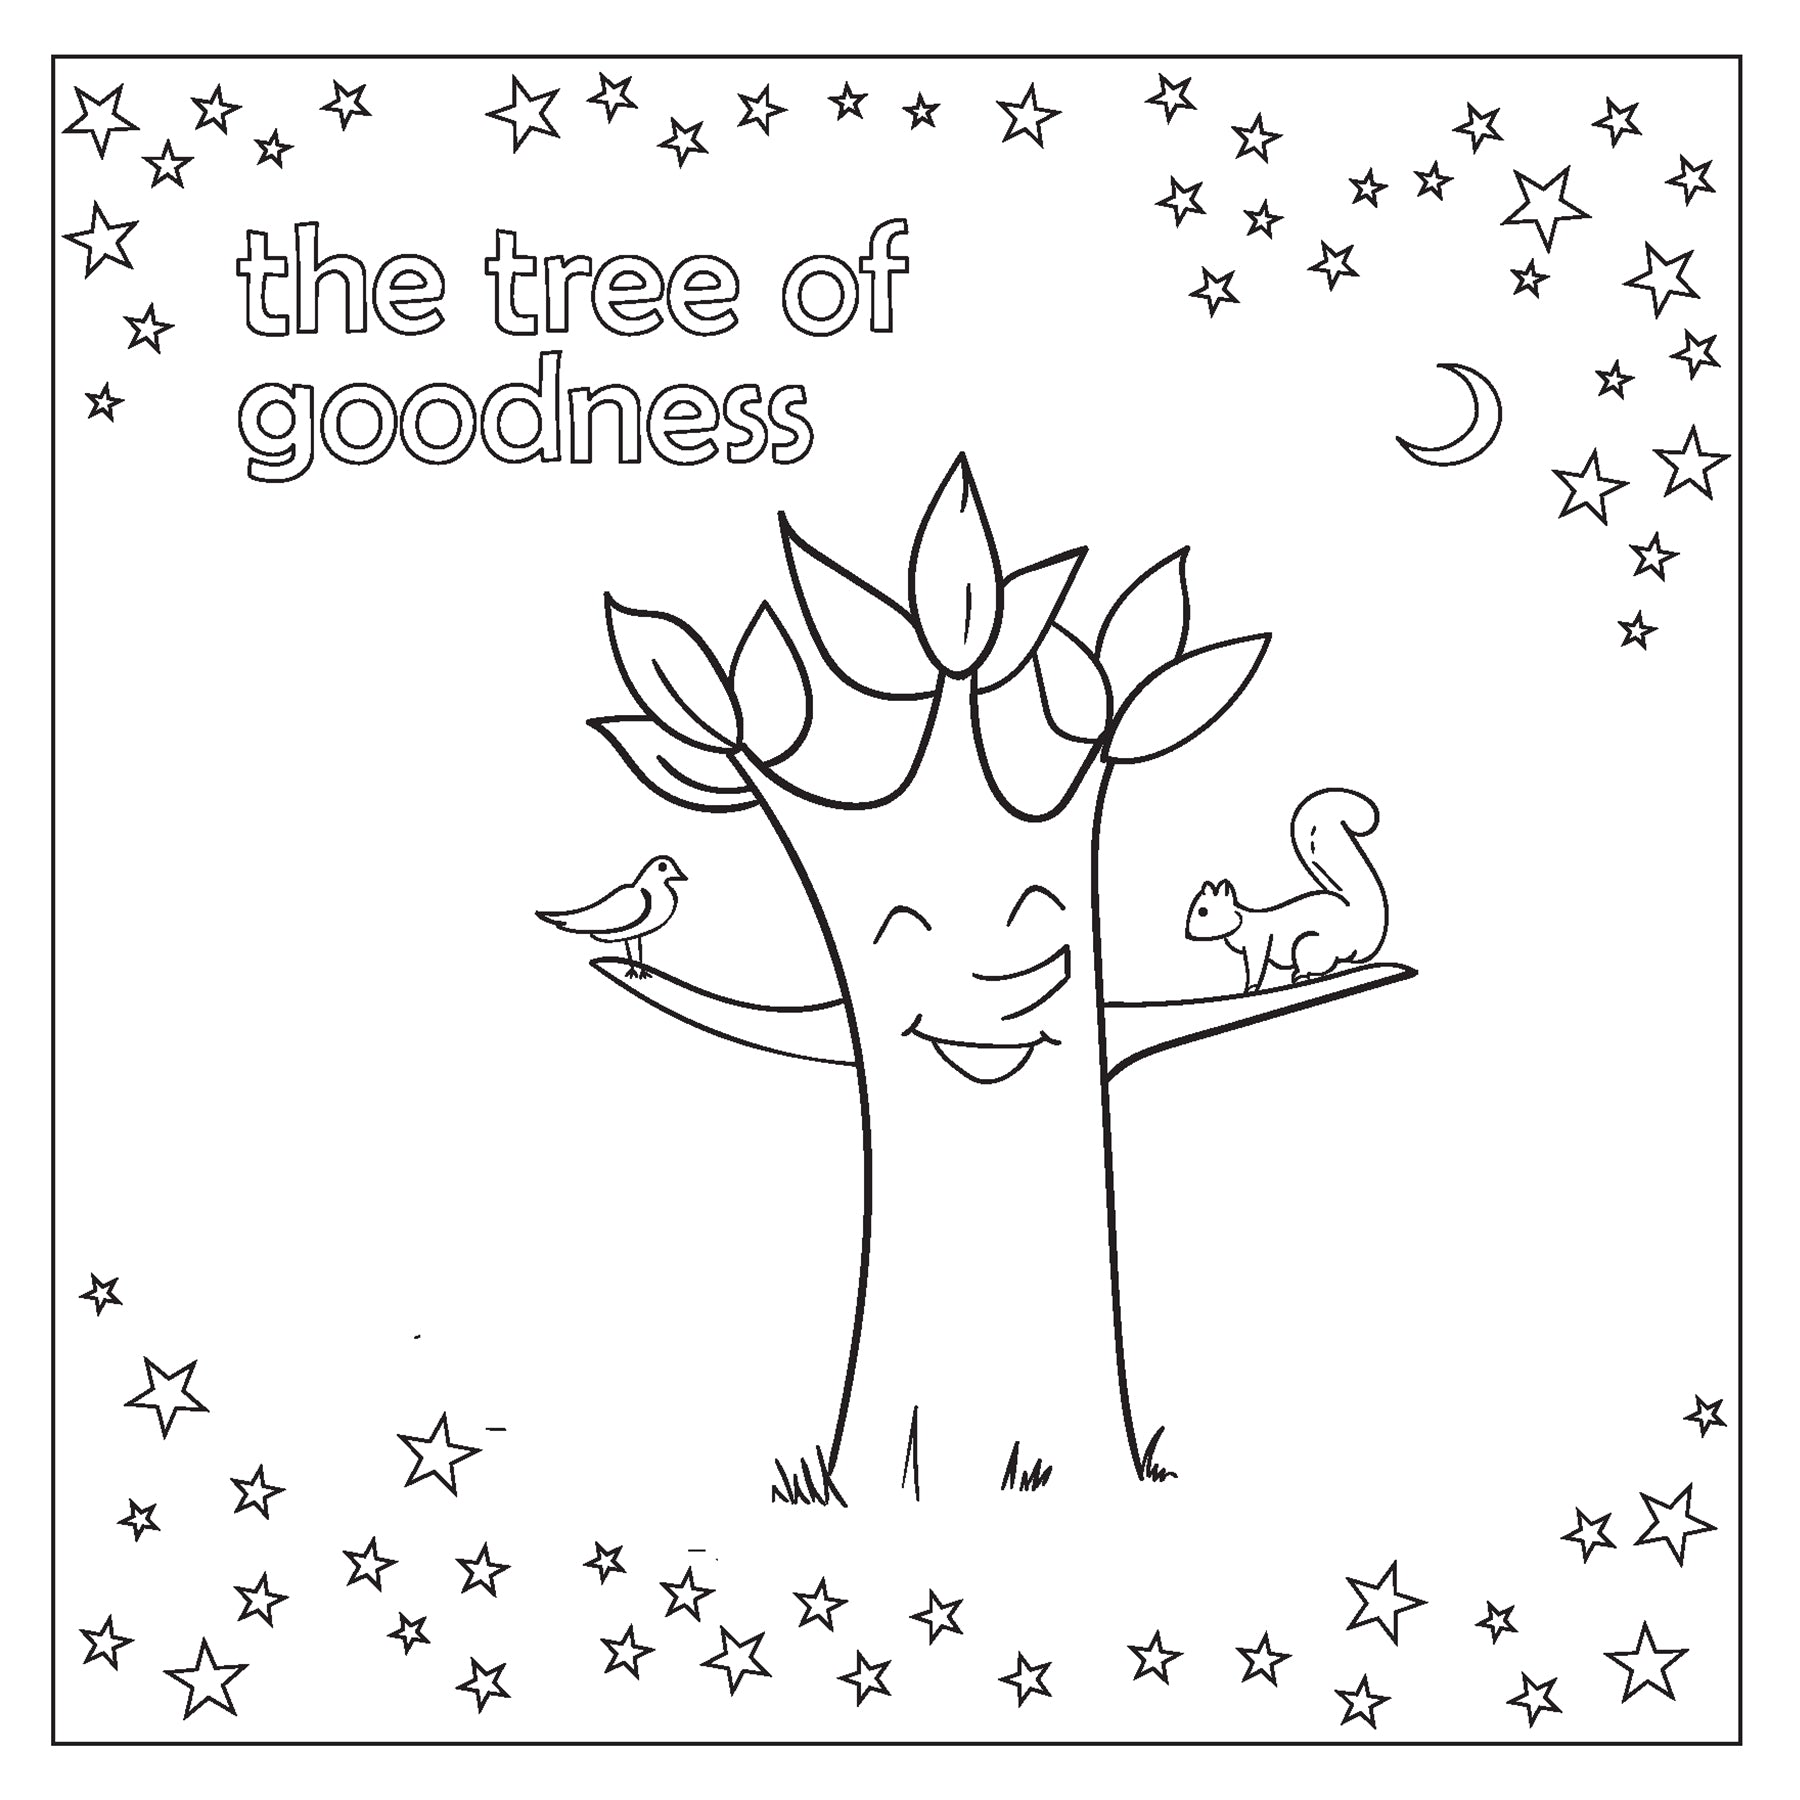 COLORING BOOKS FOR KIDS, CHOOSE FROM 10 COOL TITLES IN THIS SAVE TREES  SERIES!